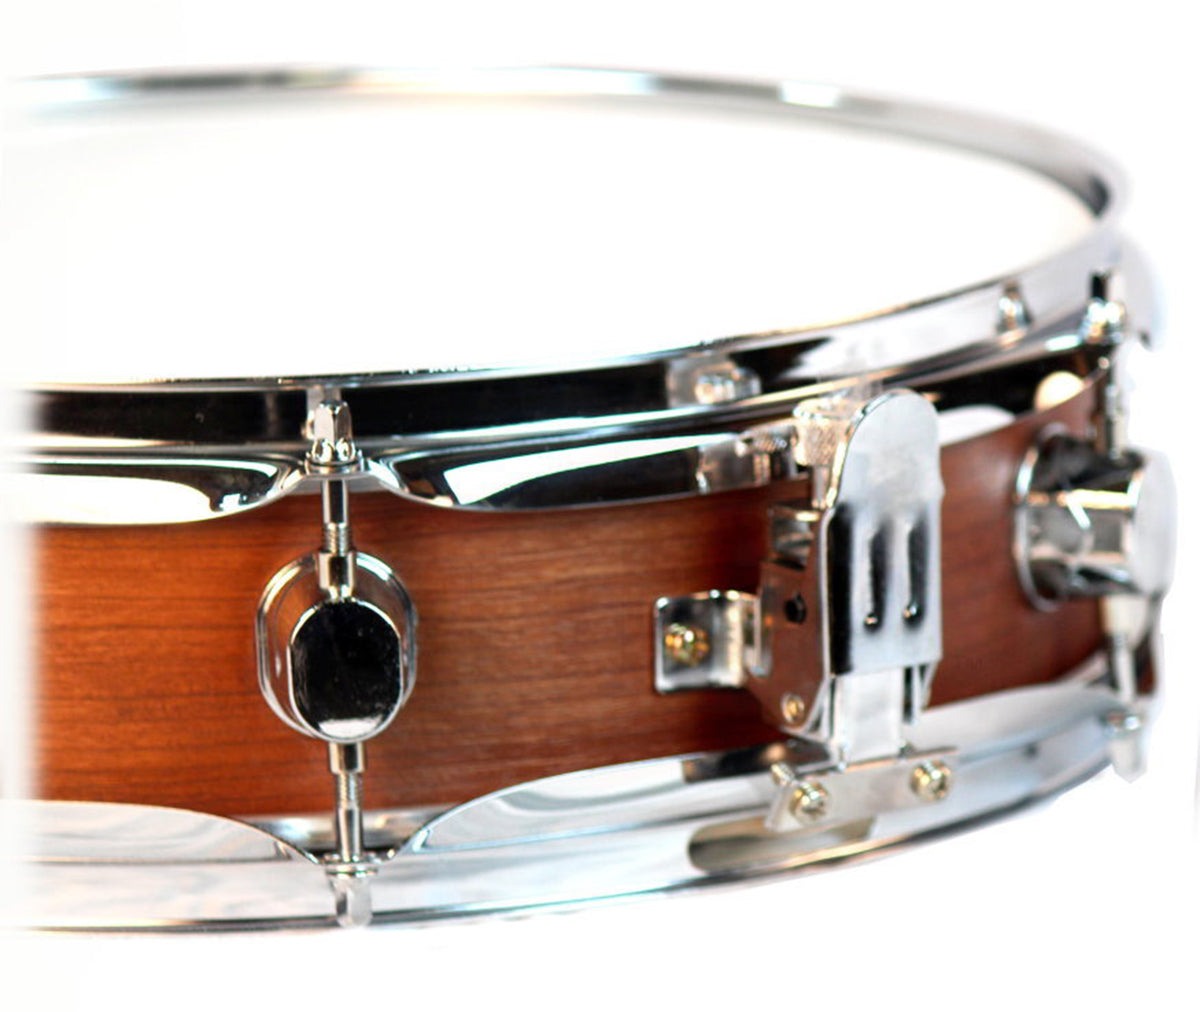 Piccolo Snare Drum 13" x 3.5" by GRIFFIN - 100% Poplar Wood Shell Hickory Finish & Coated Drum Head